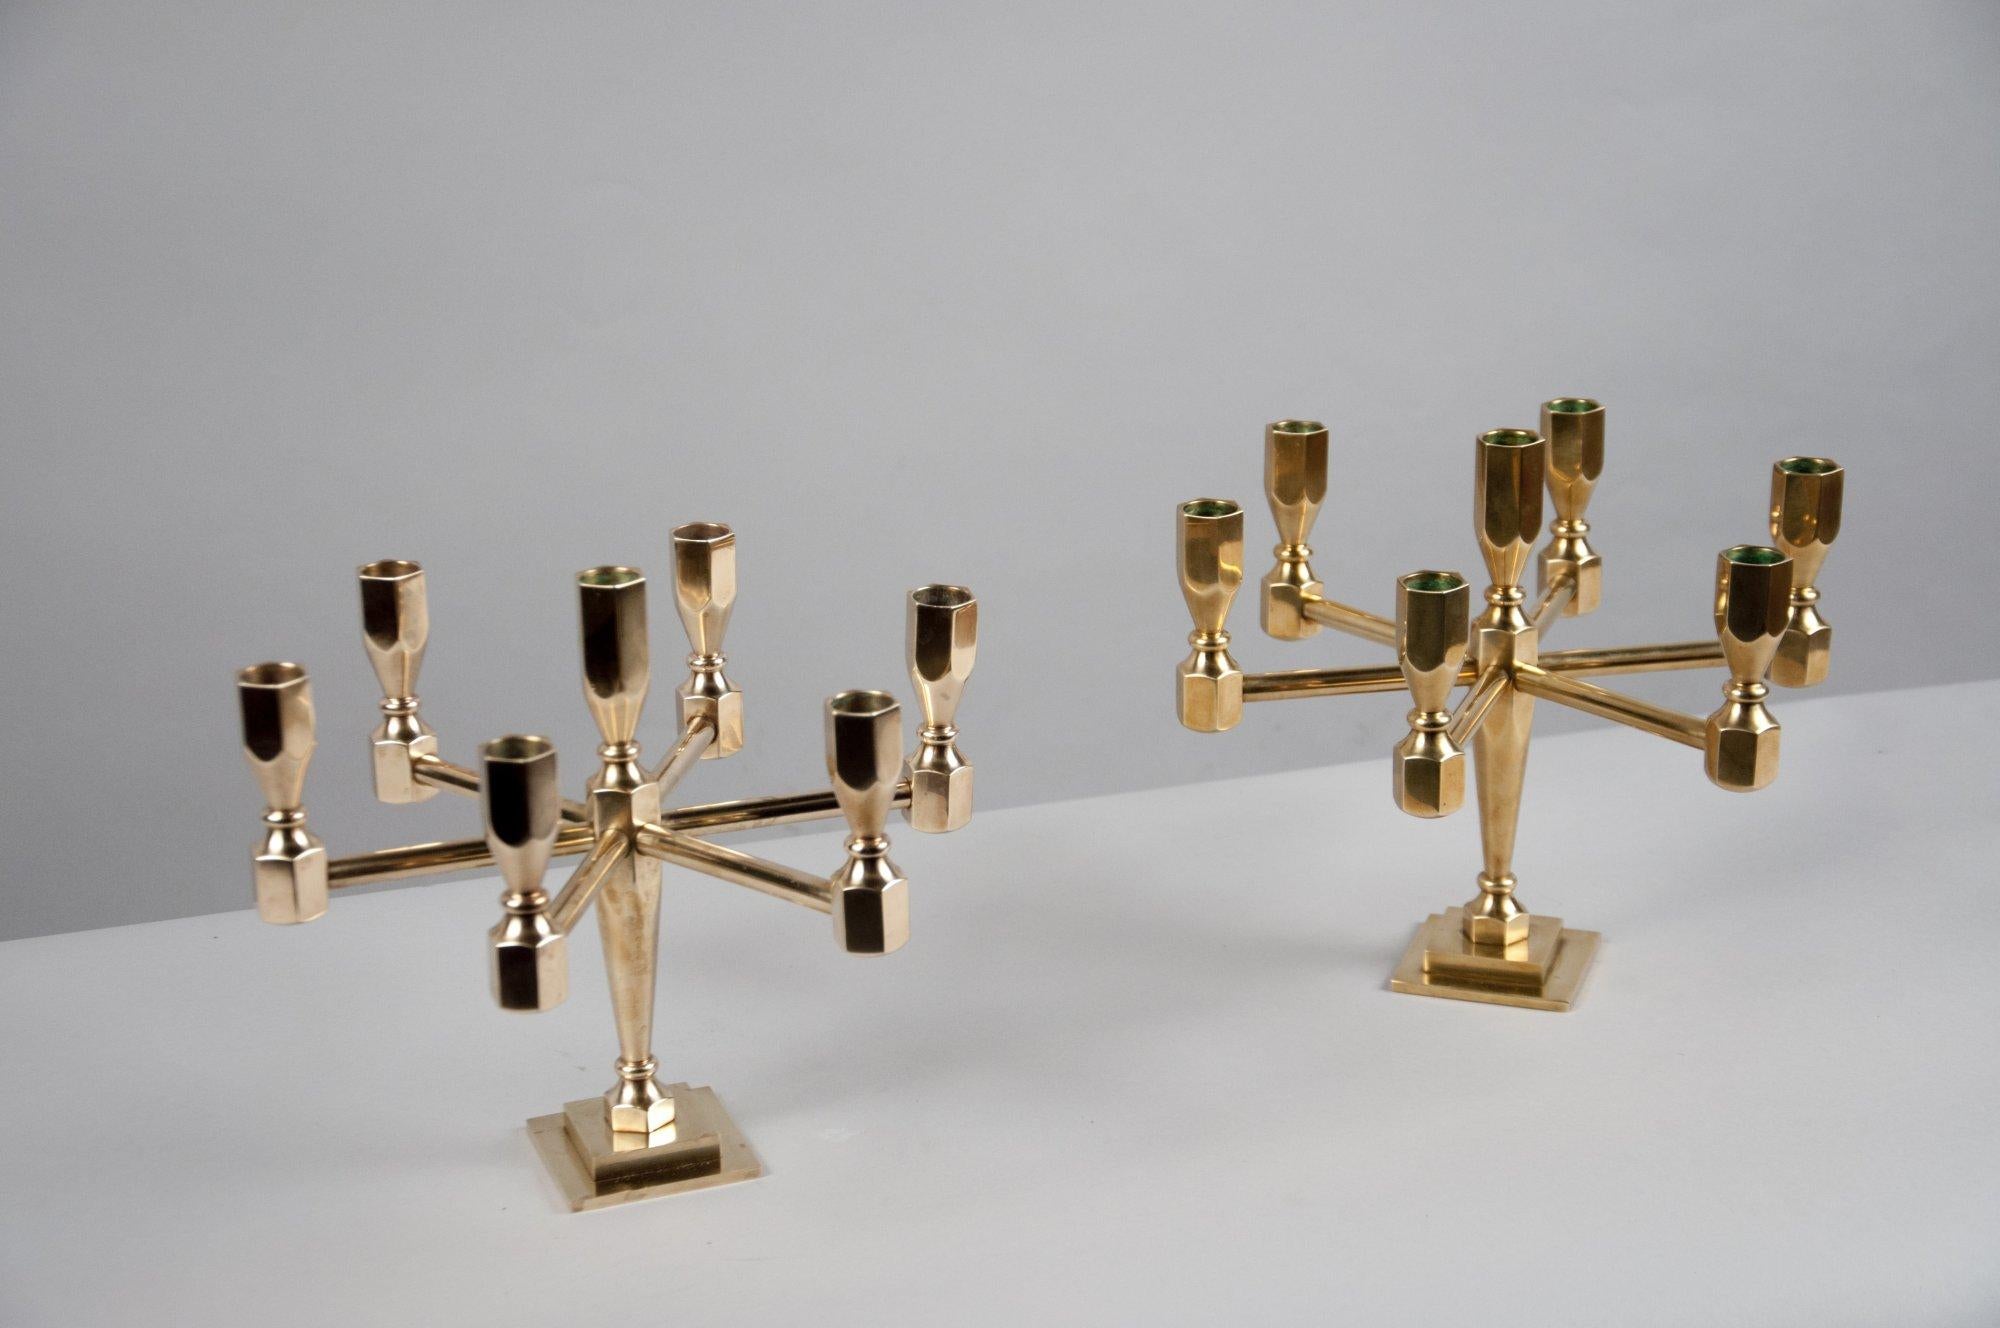 Pair of solid brass candelabra with six hexagonal candleholders radiating from a seventh slightly raised candleholder in the center, raised on a stepped square base.